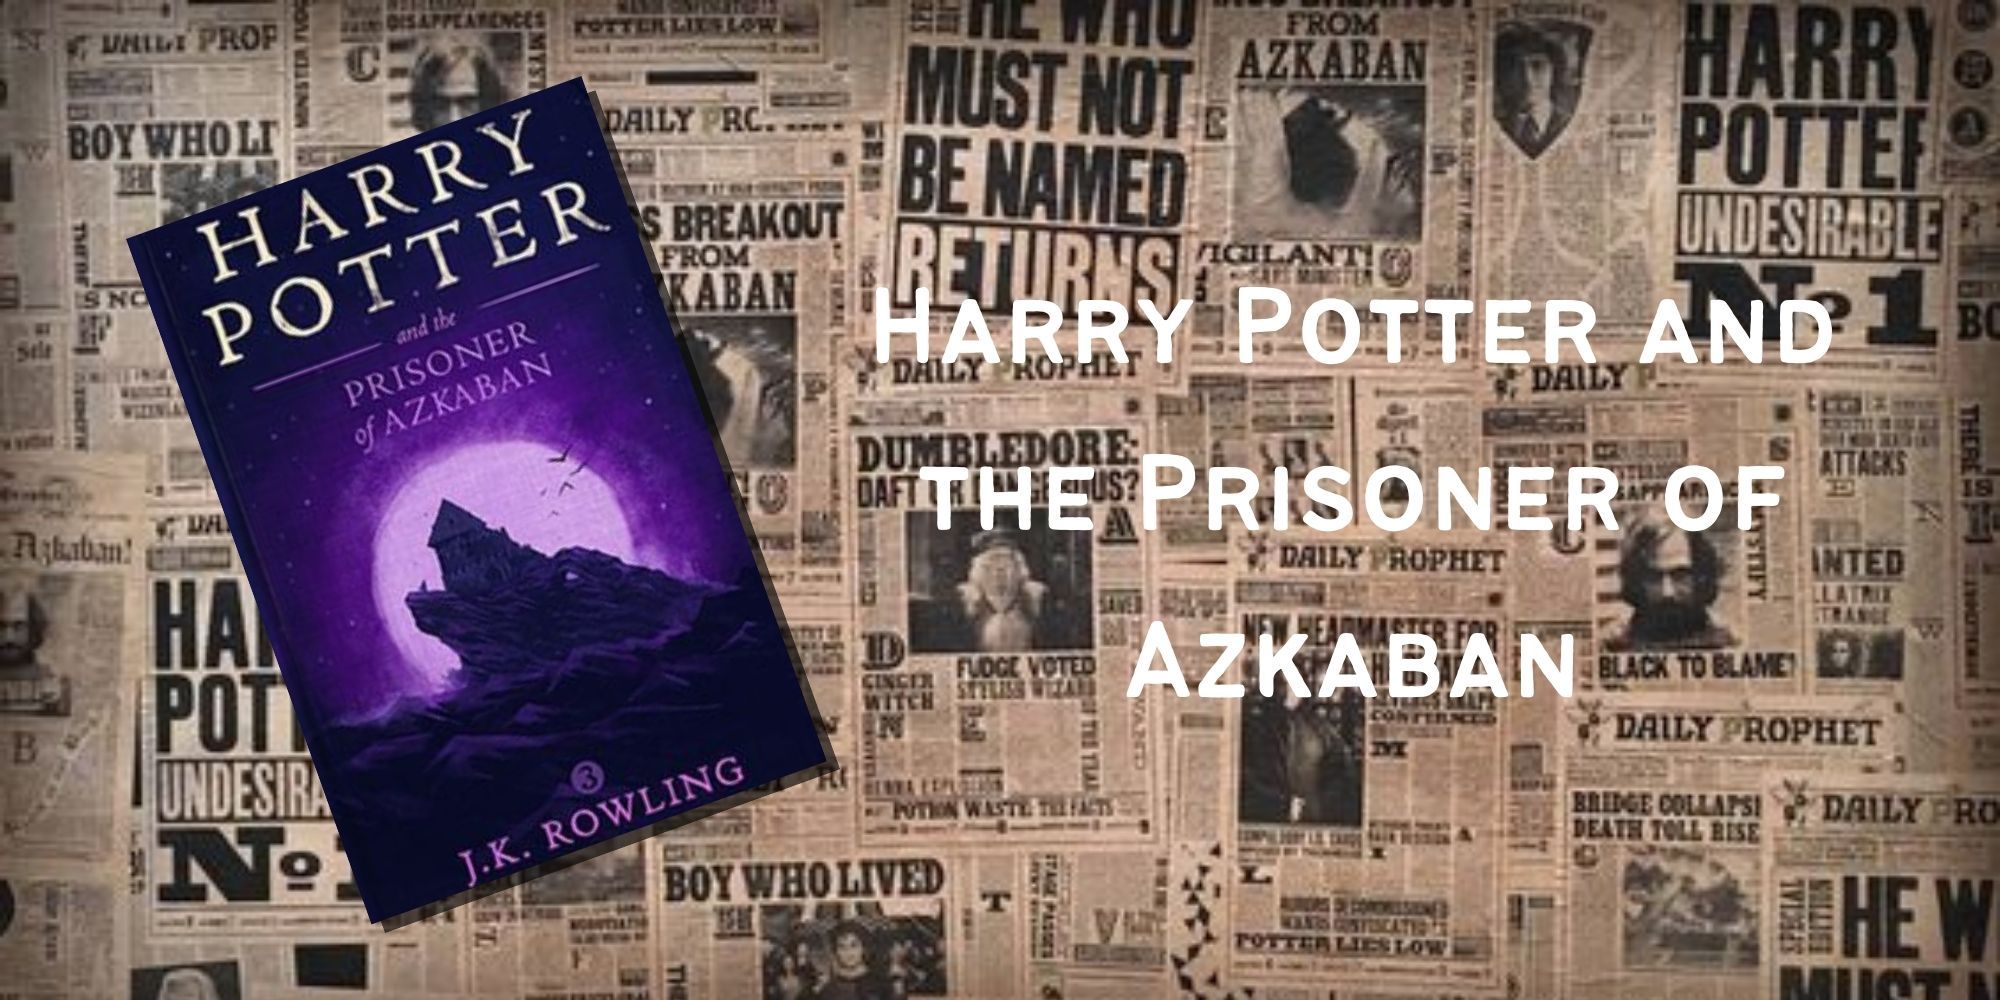 The cover of Harry Potter and the Prisoner of Azkaban